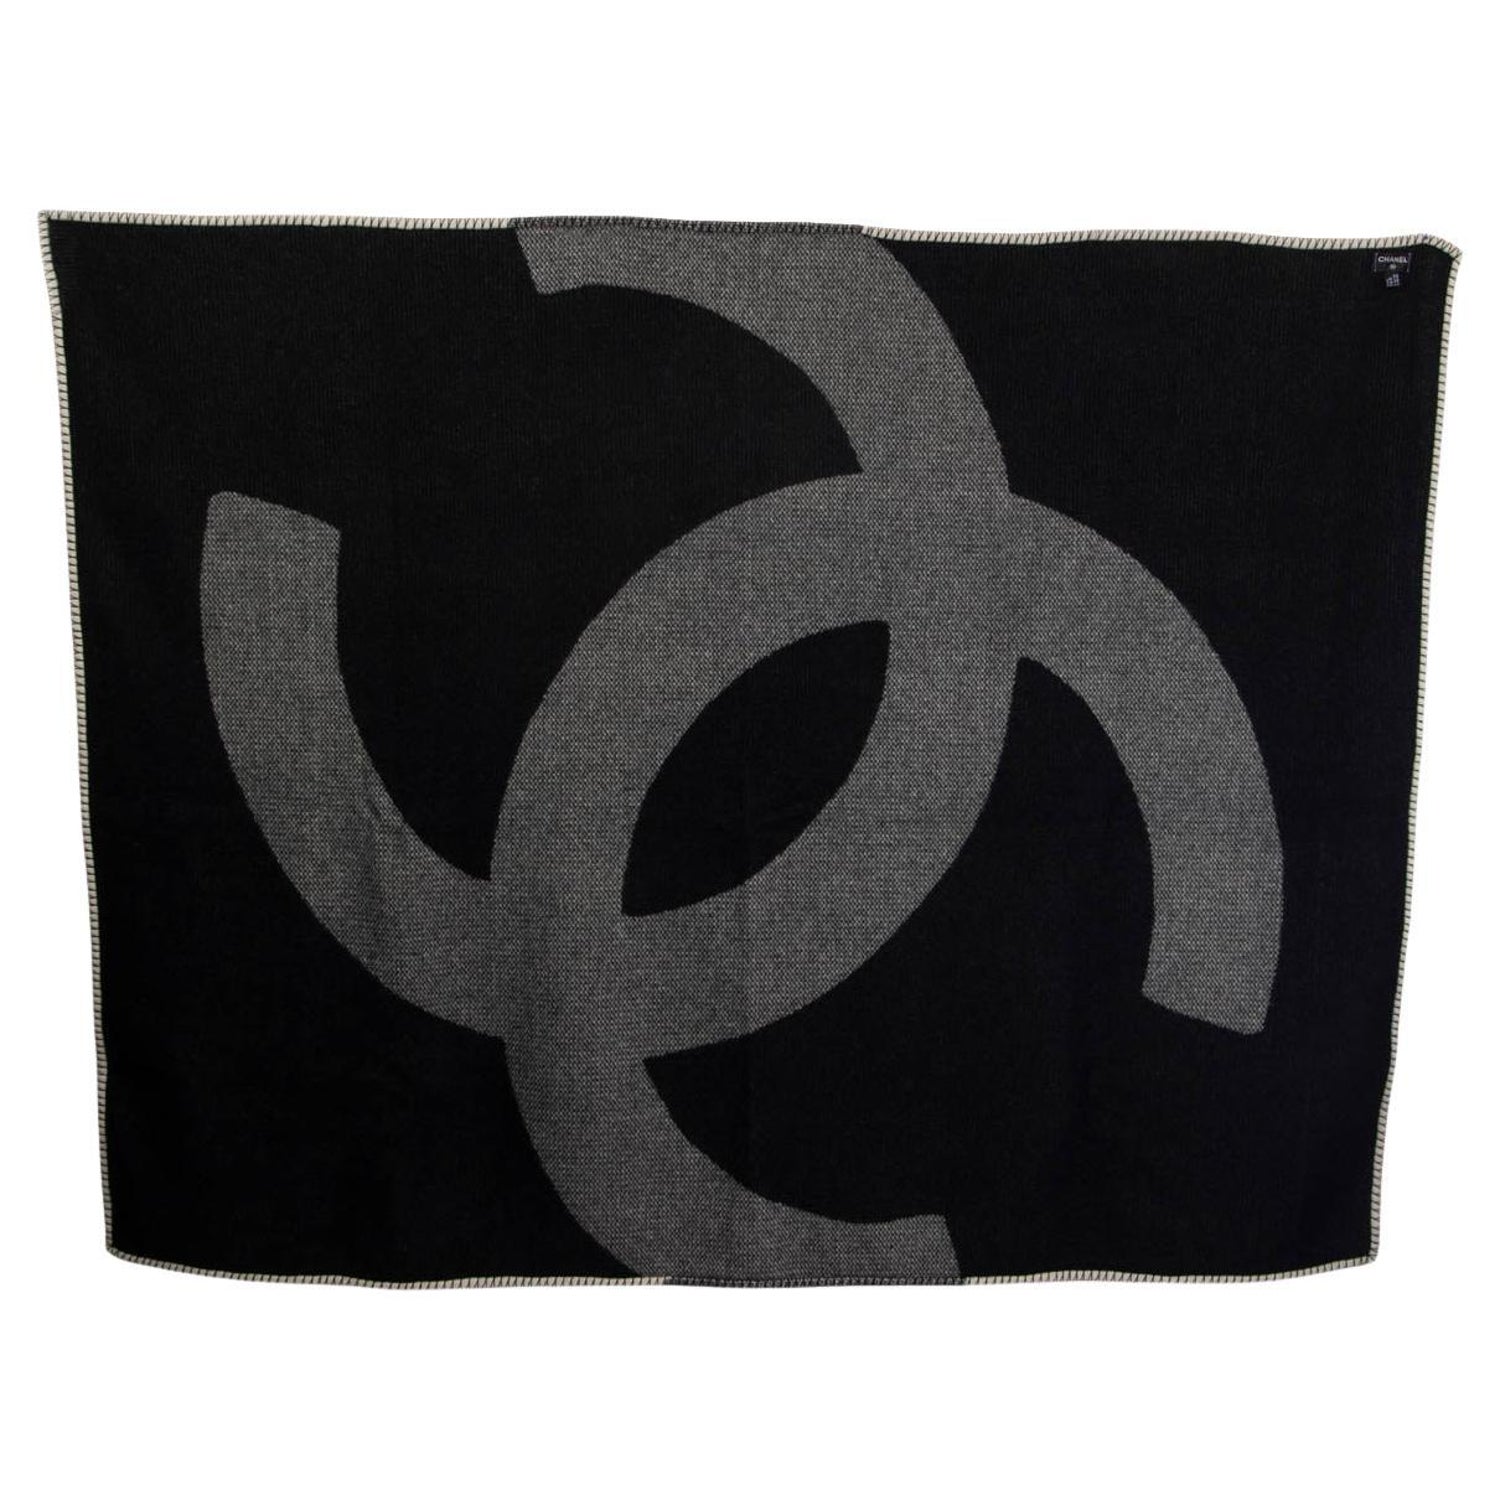 Vintage Chanel Pillows and Throws - 7 For Sale at 1stDibs  chanel throws, chanel  pillows for couch, vintage chanel blanket